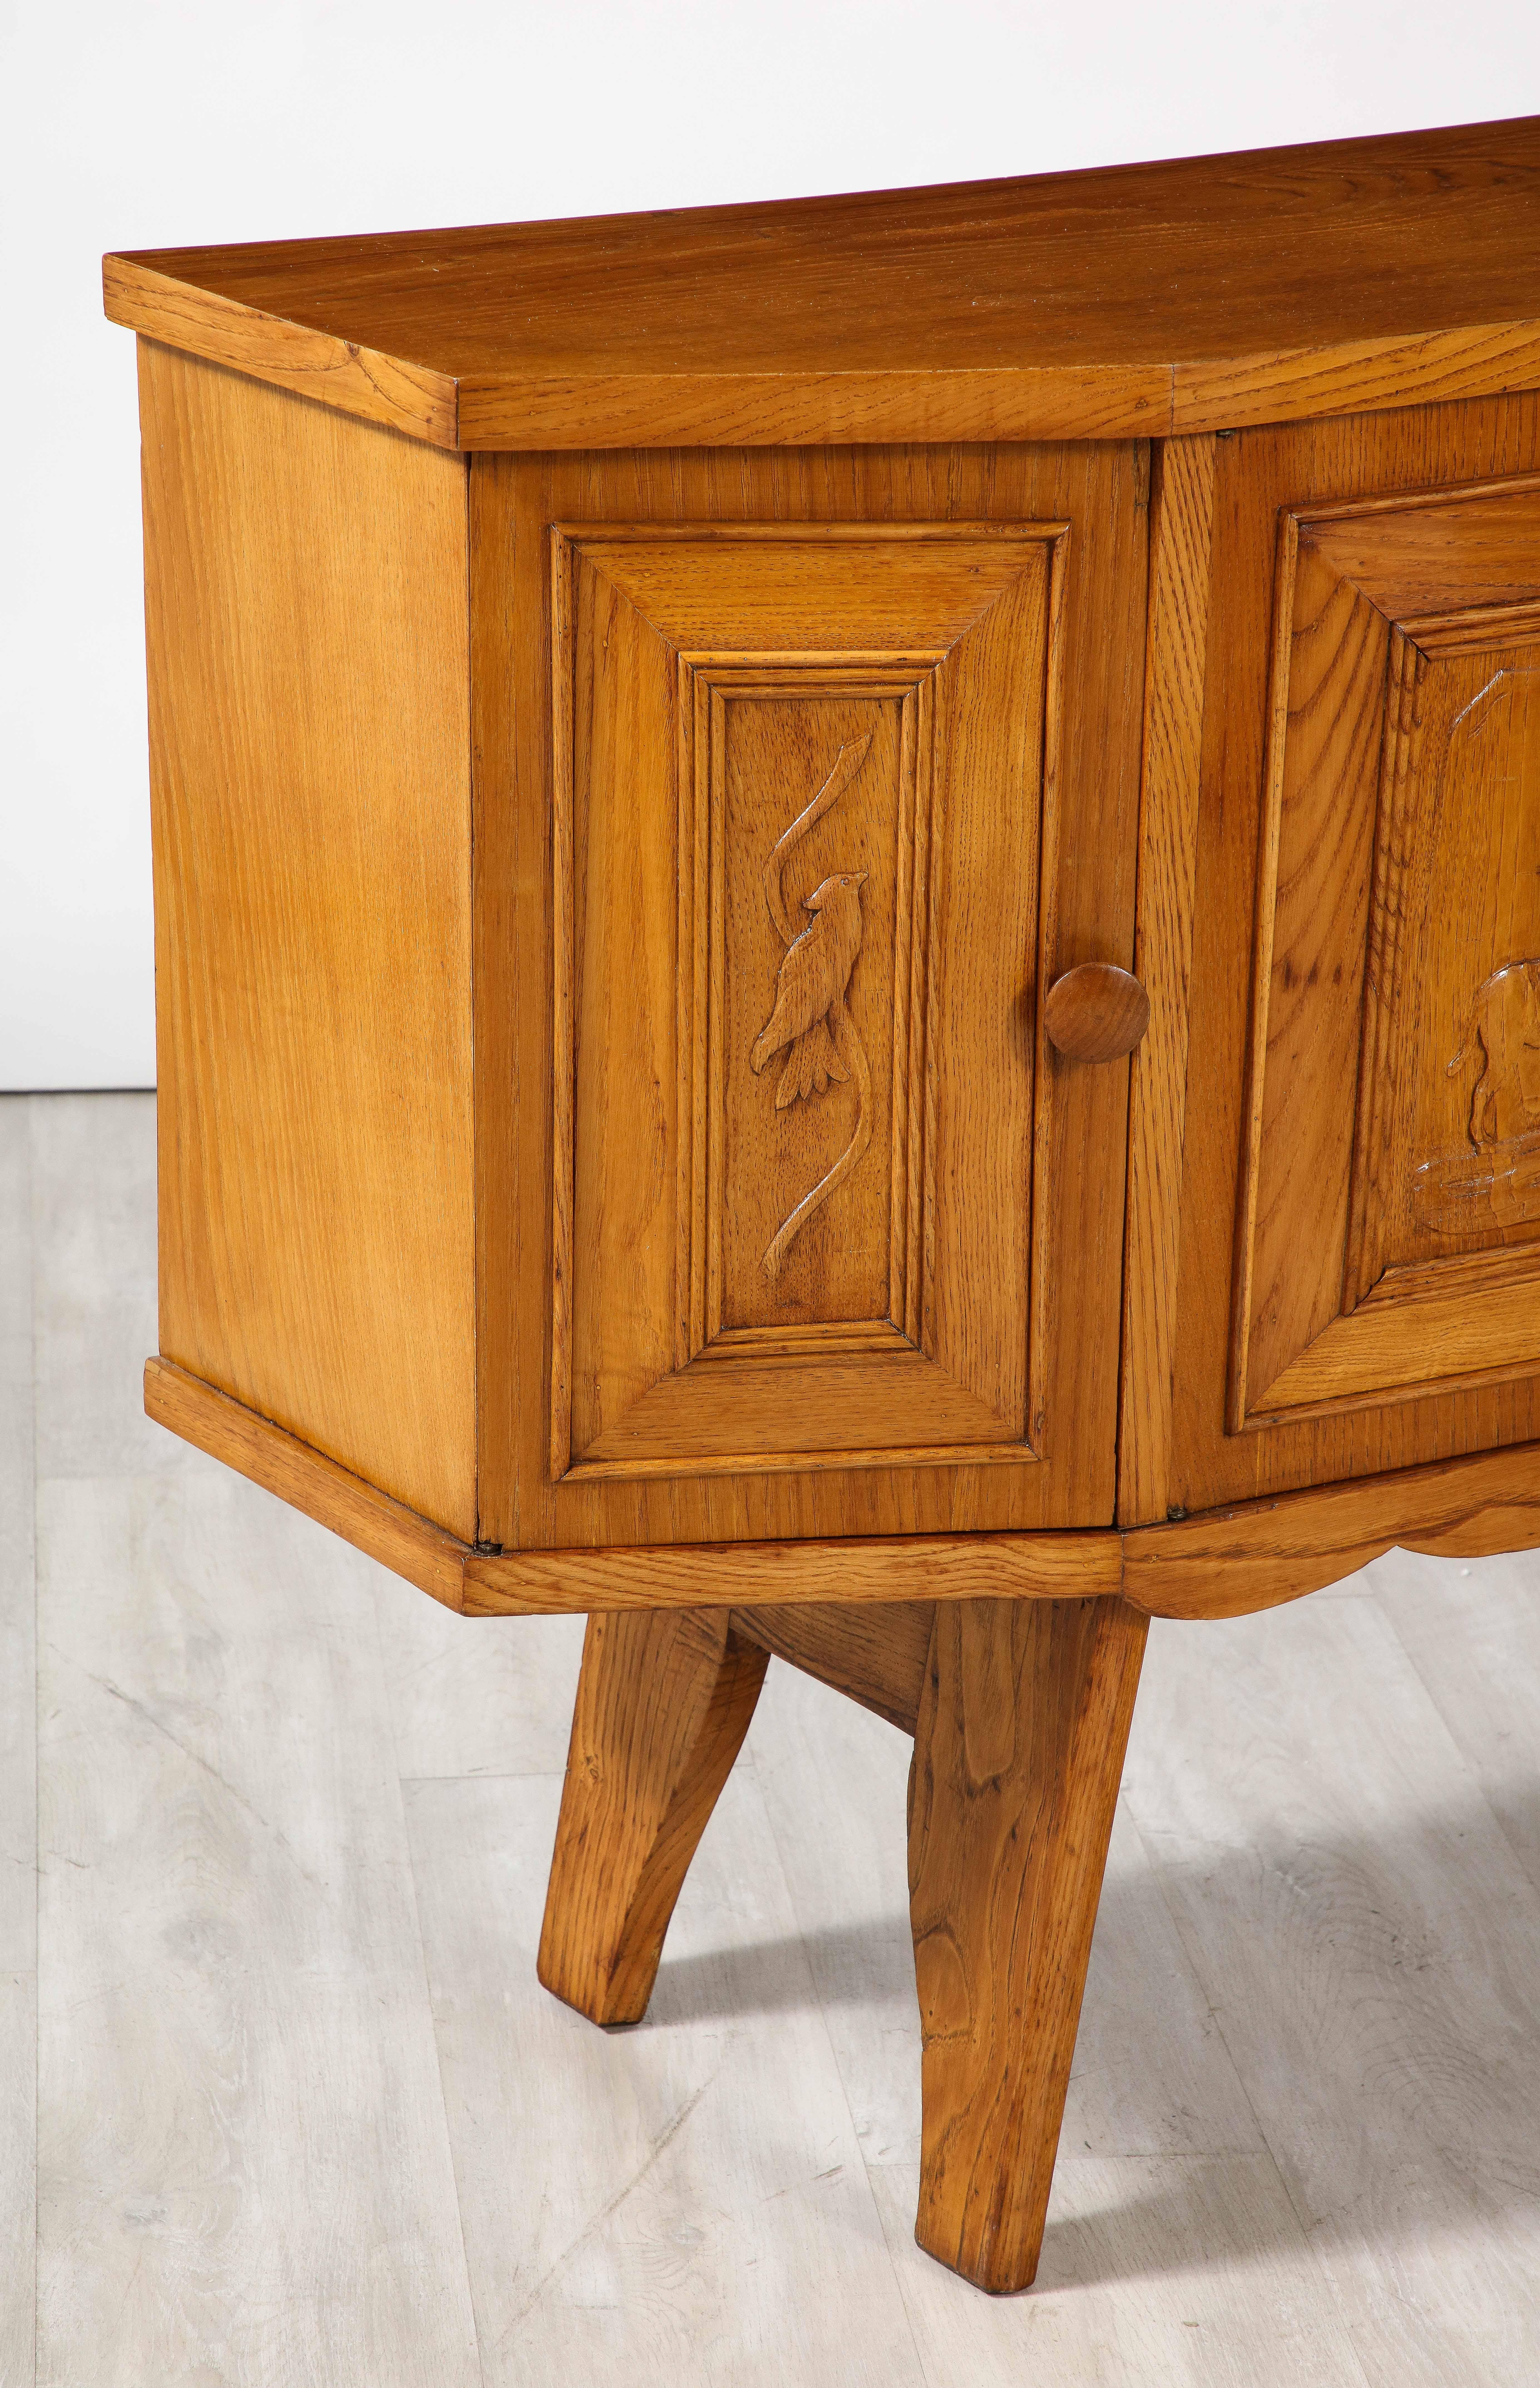 Italian Tuscan Art Deco Carved Oak Sideboard or Credenza, circa 1940 For Sale 11